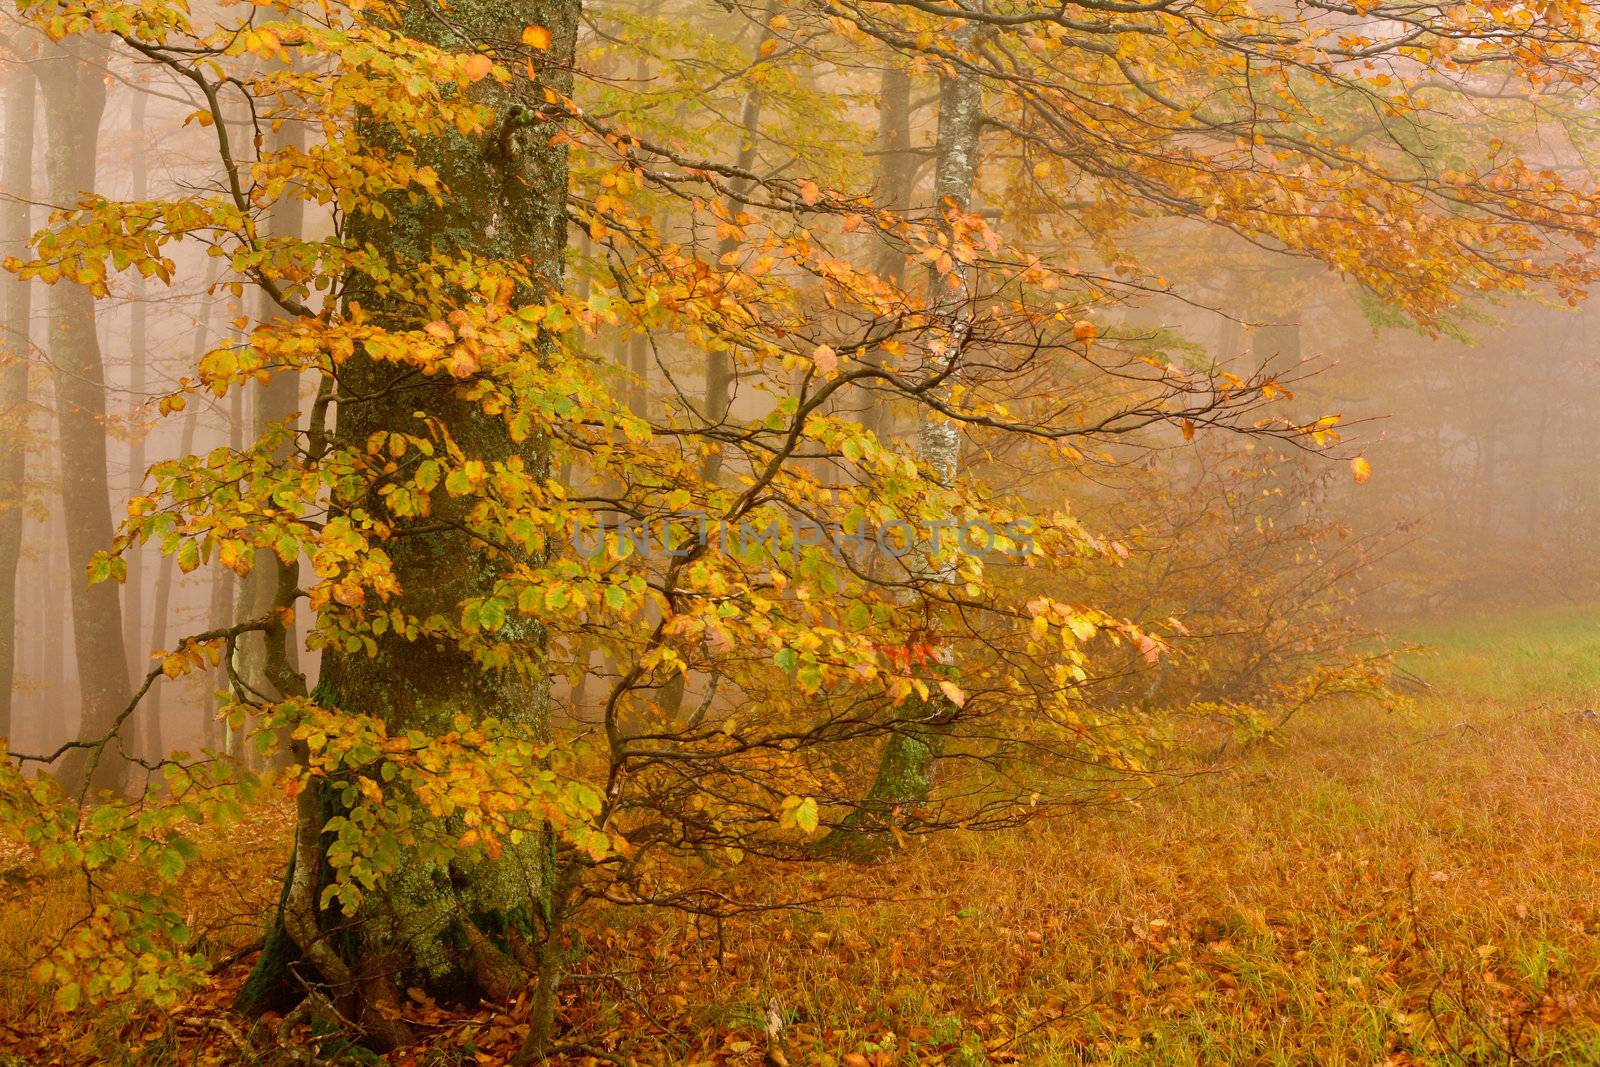 An image of yellow trees in autumn forest